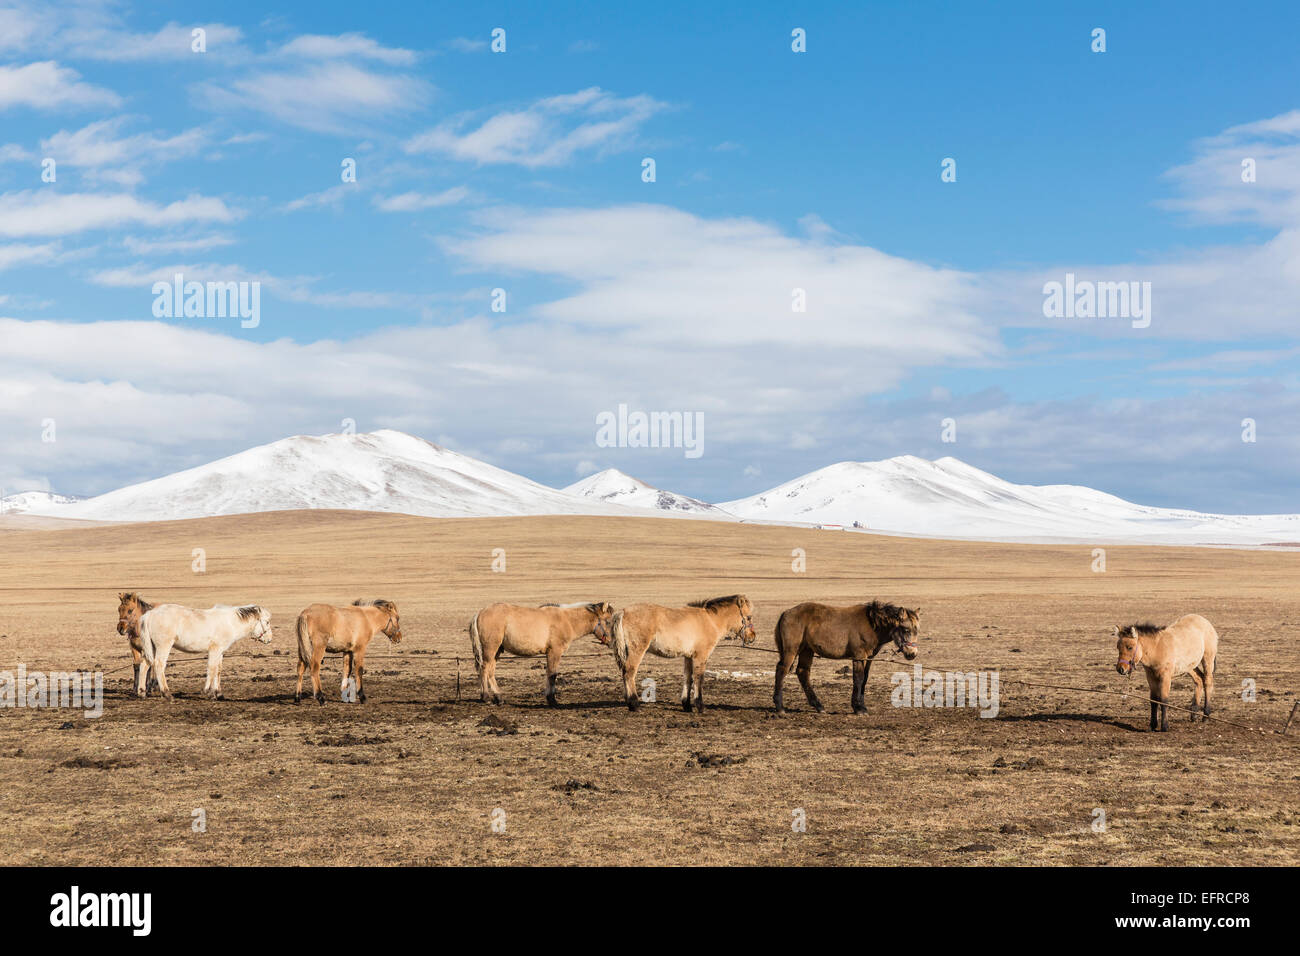 Horses Grazing and Snow Mountain in the Background, Mongolia Stock Photo